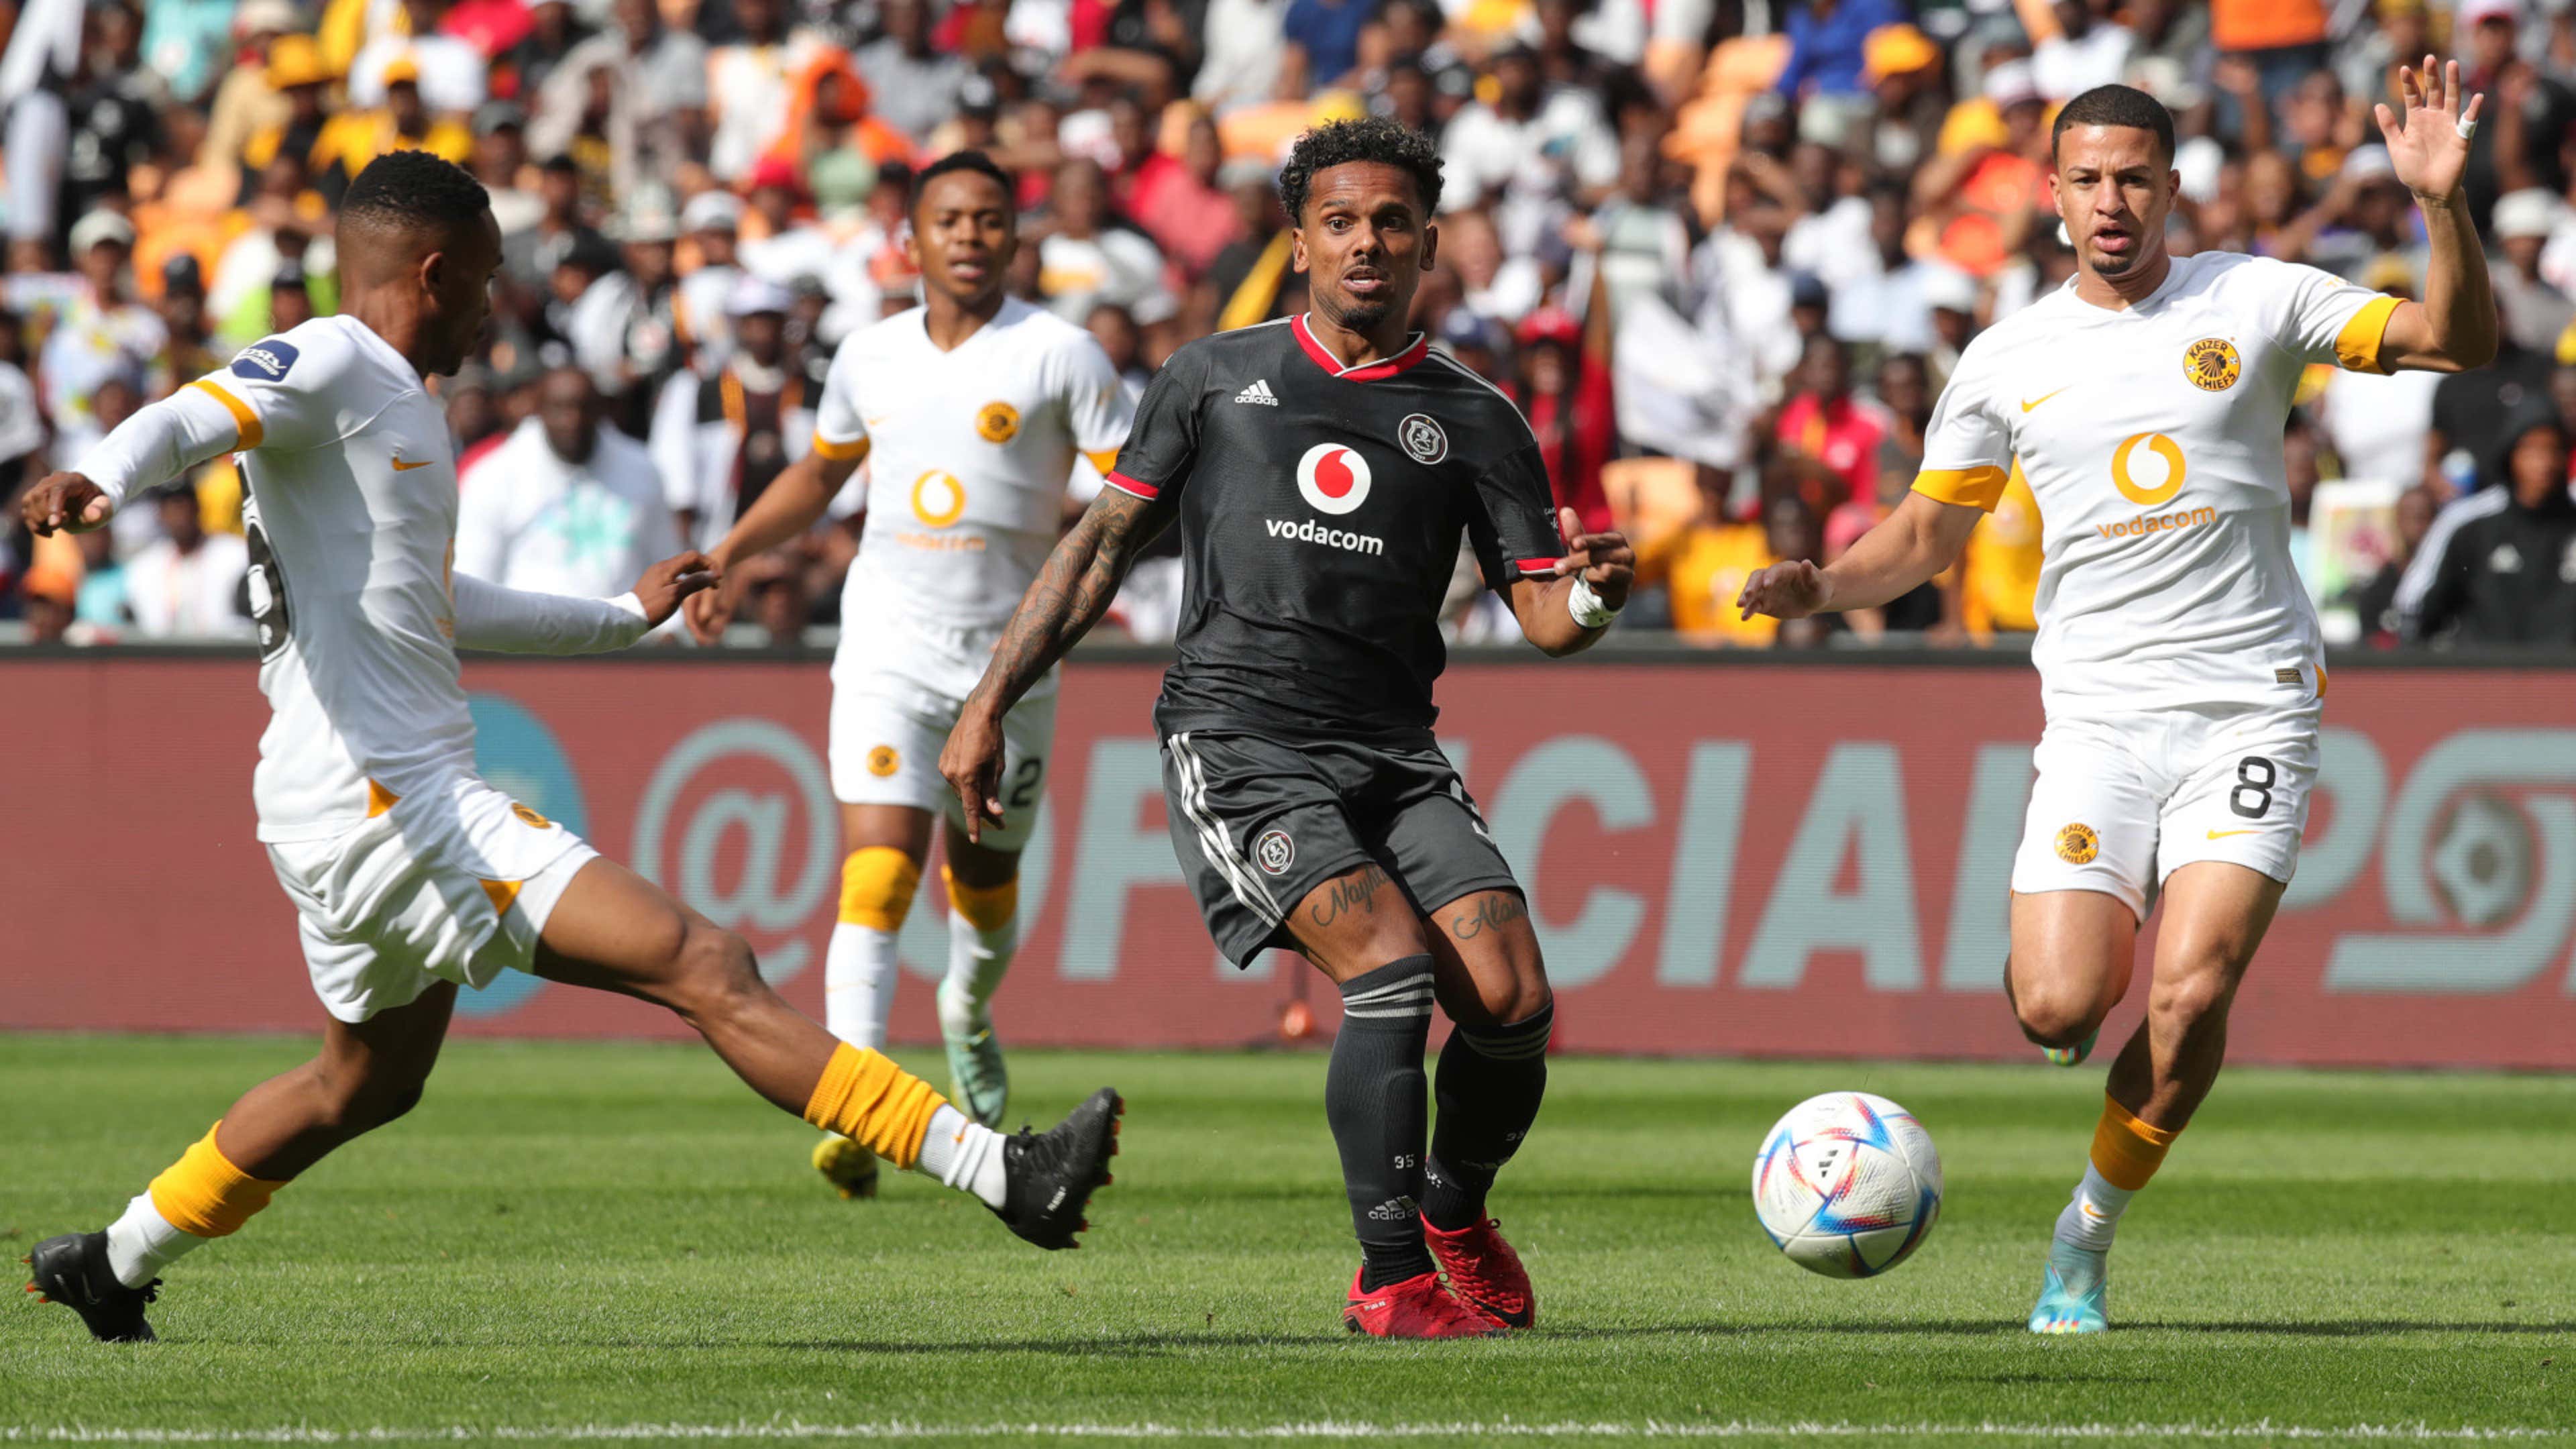 LIVE UPDATES - Orlando Pirates out to spoil Kaizer Chiefs party